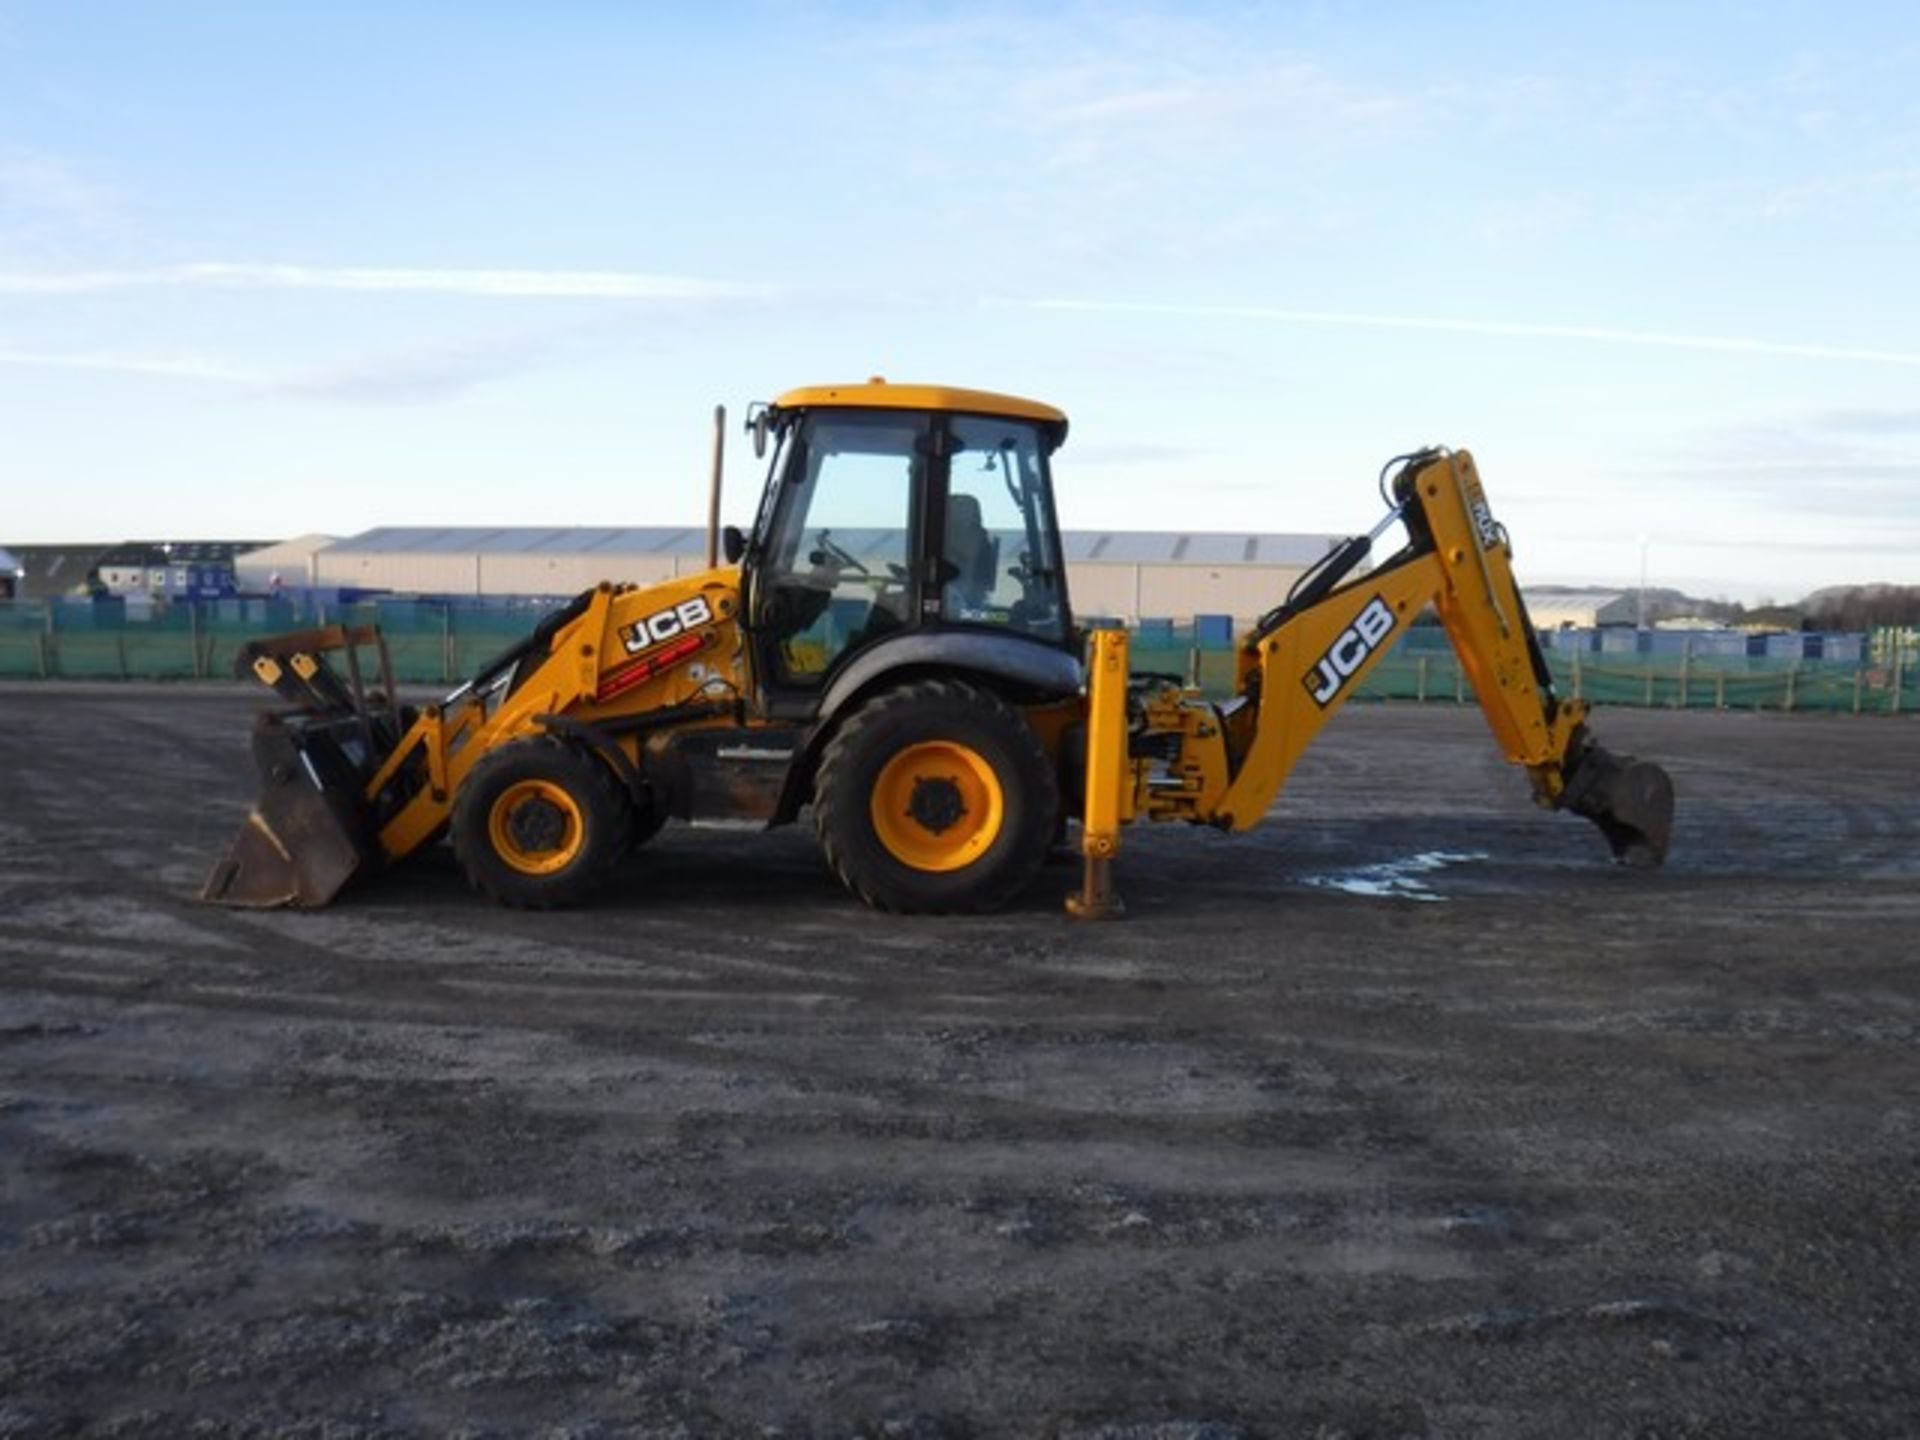 2011 JCB 3CX ECO 4 in 1 bucket S/N JCB3CX4TP02008318 - 6175 hrs (not verified) - Image 7 of 14